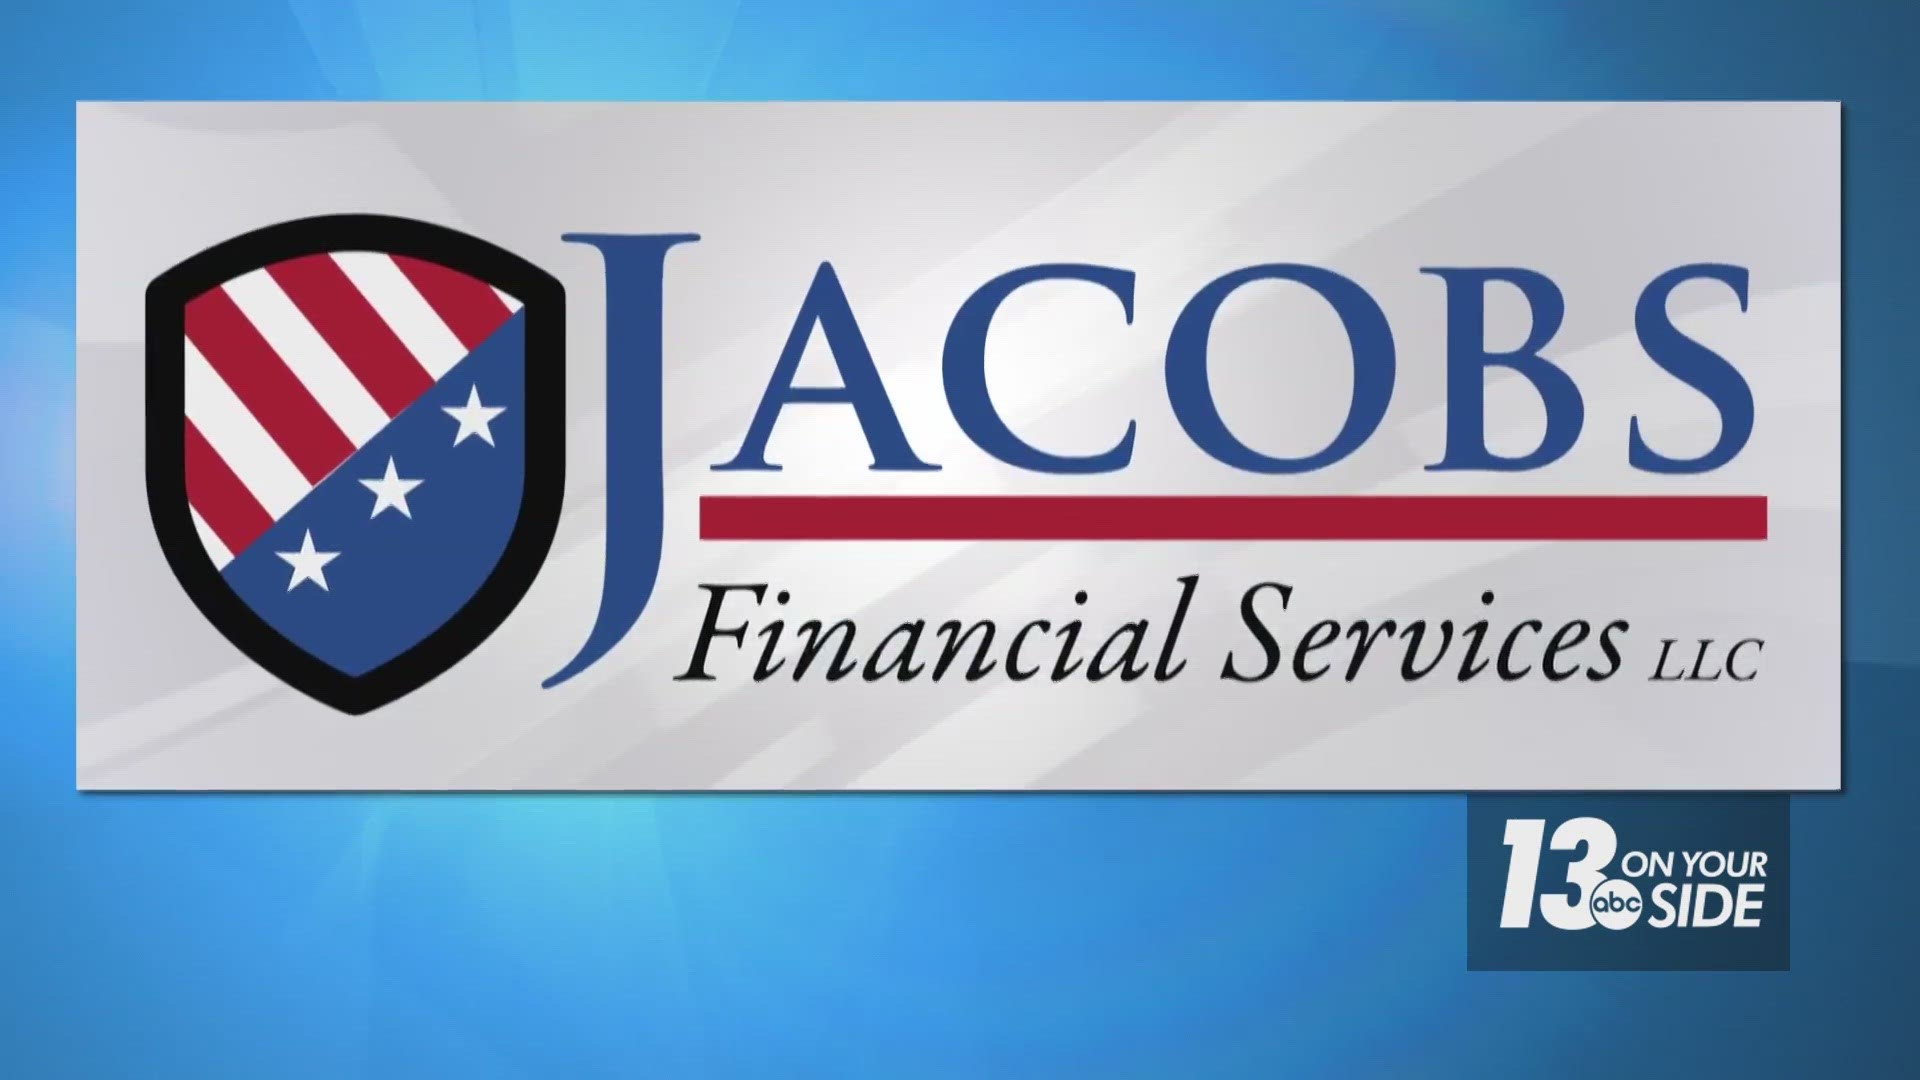 Tom Jacobs from Jacobs Financial Services has made it his life’s work to help people get to and through retirement without worry.